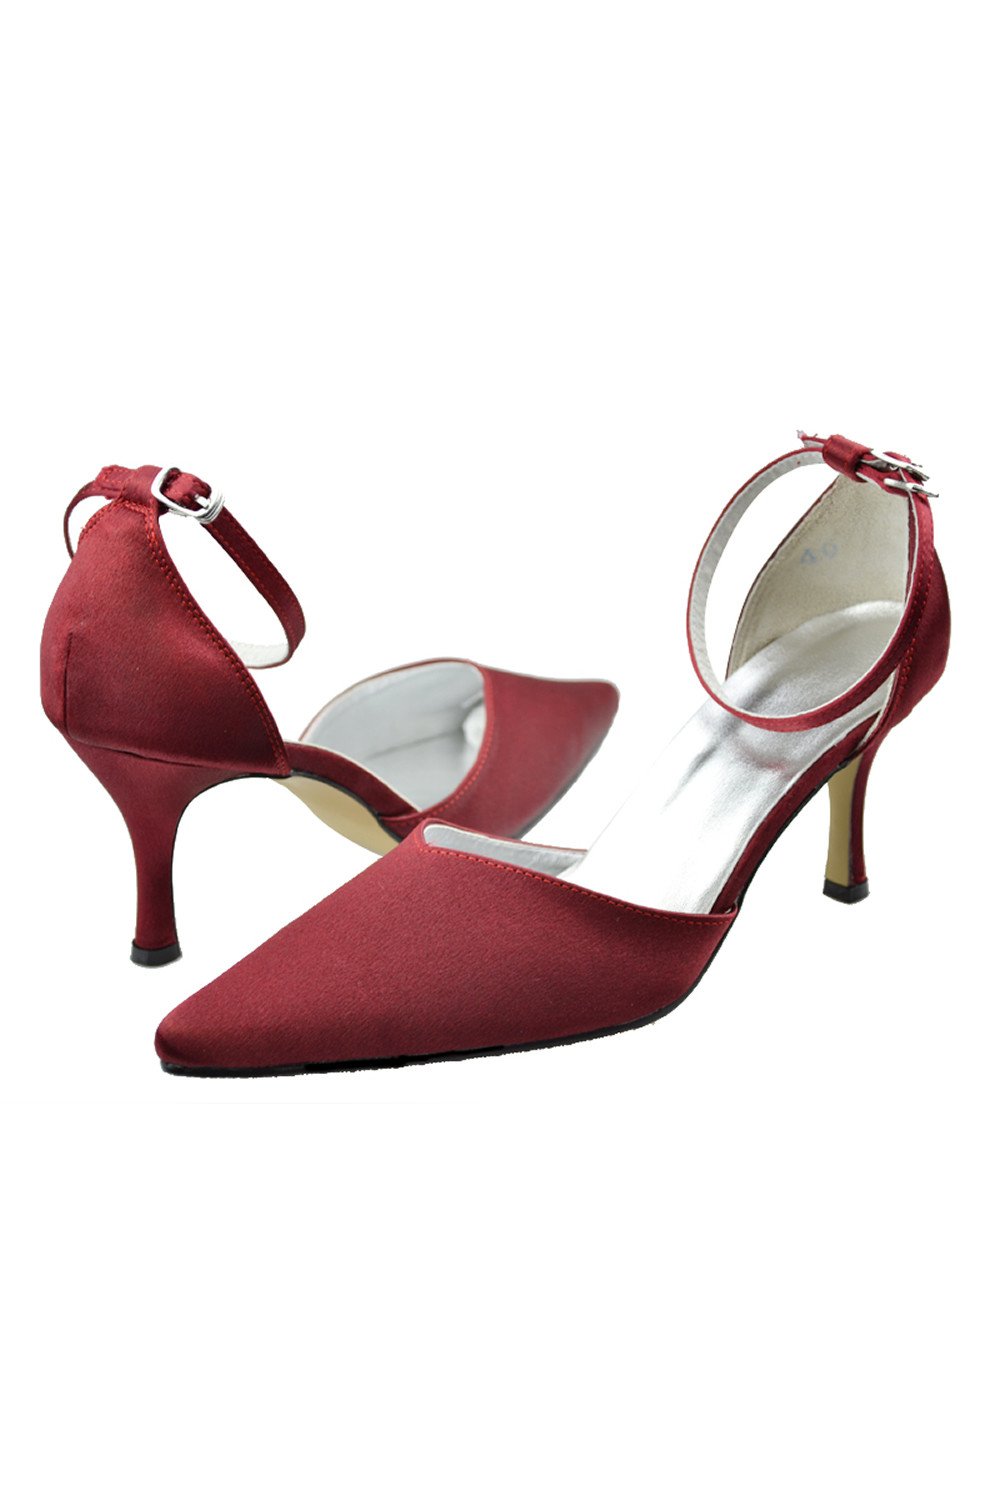 Low Heel Wedding Party Shoes Fashion Shoes L-0037